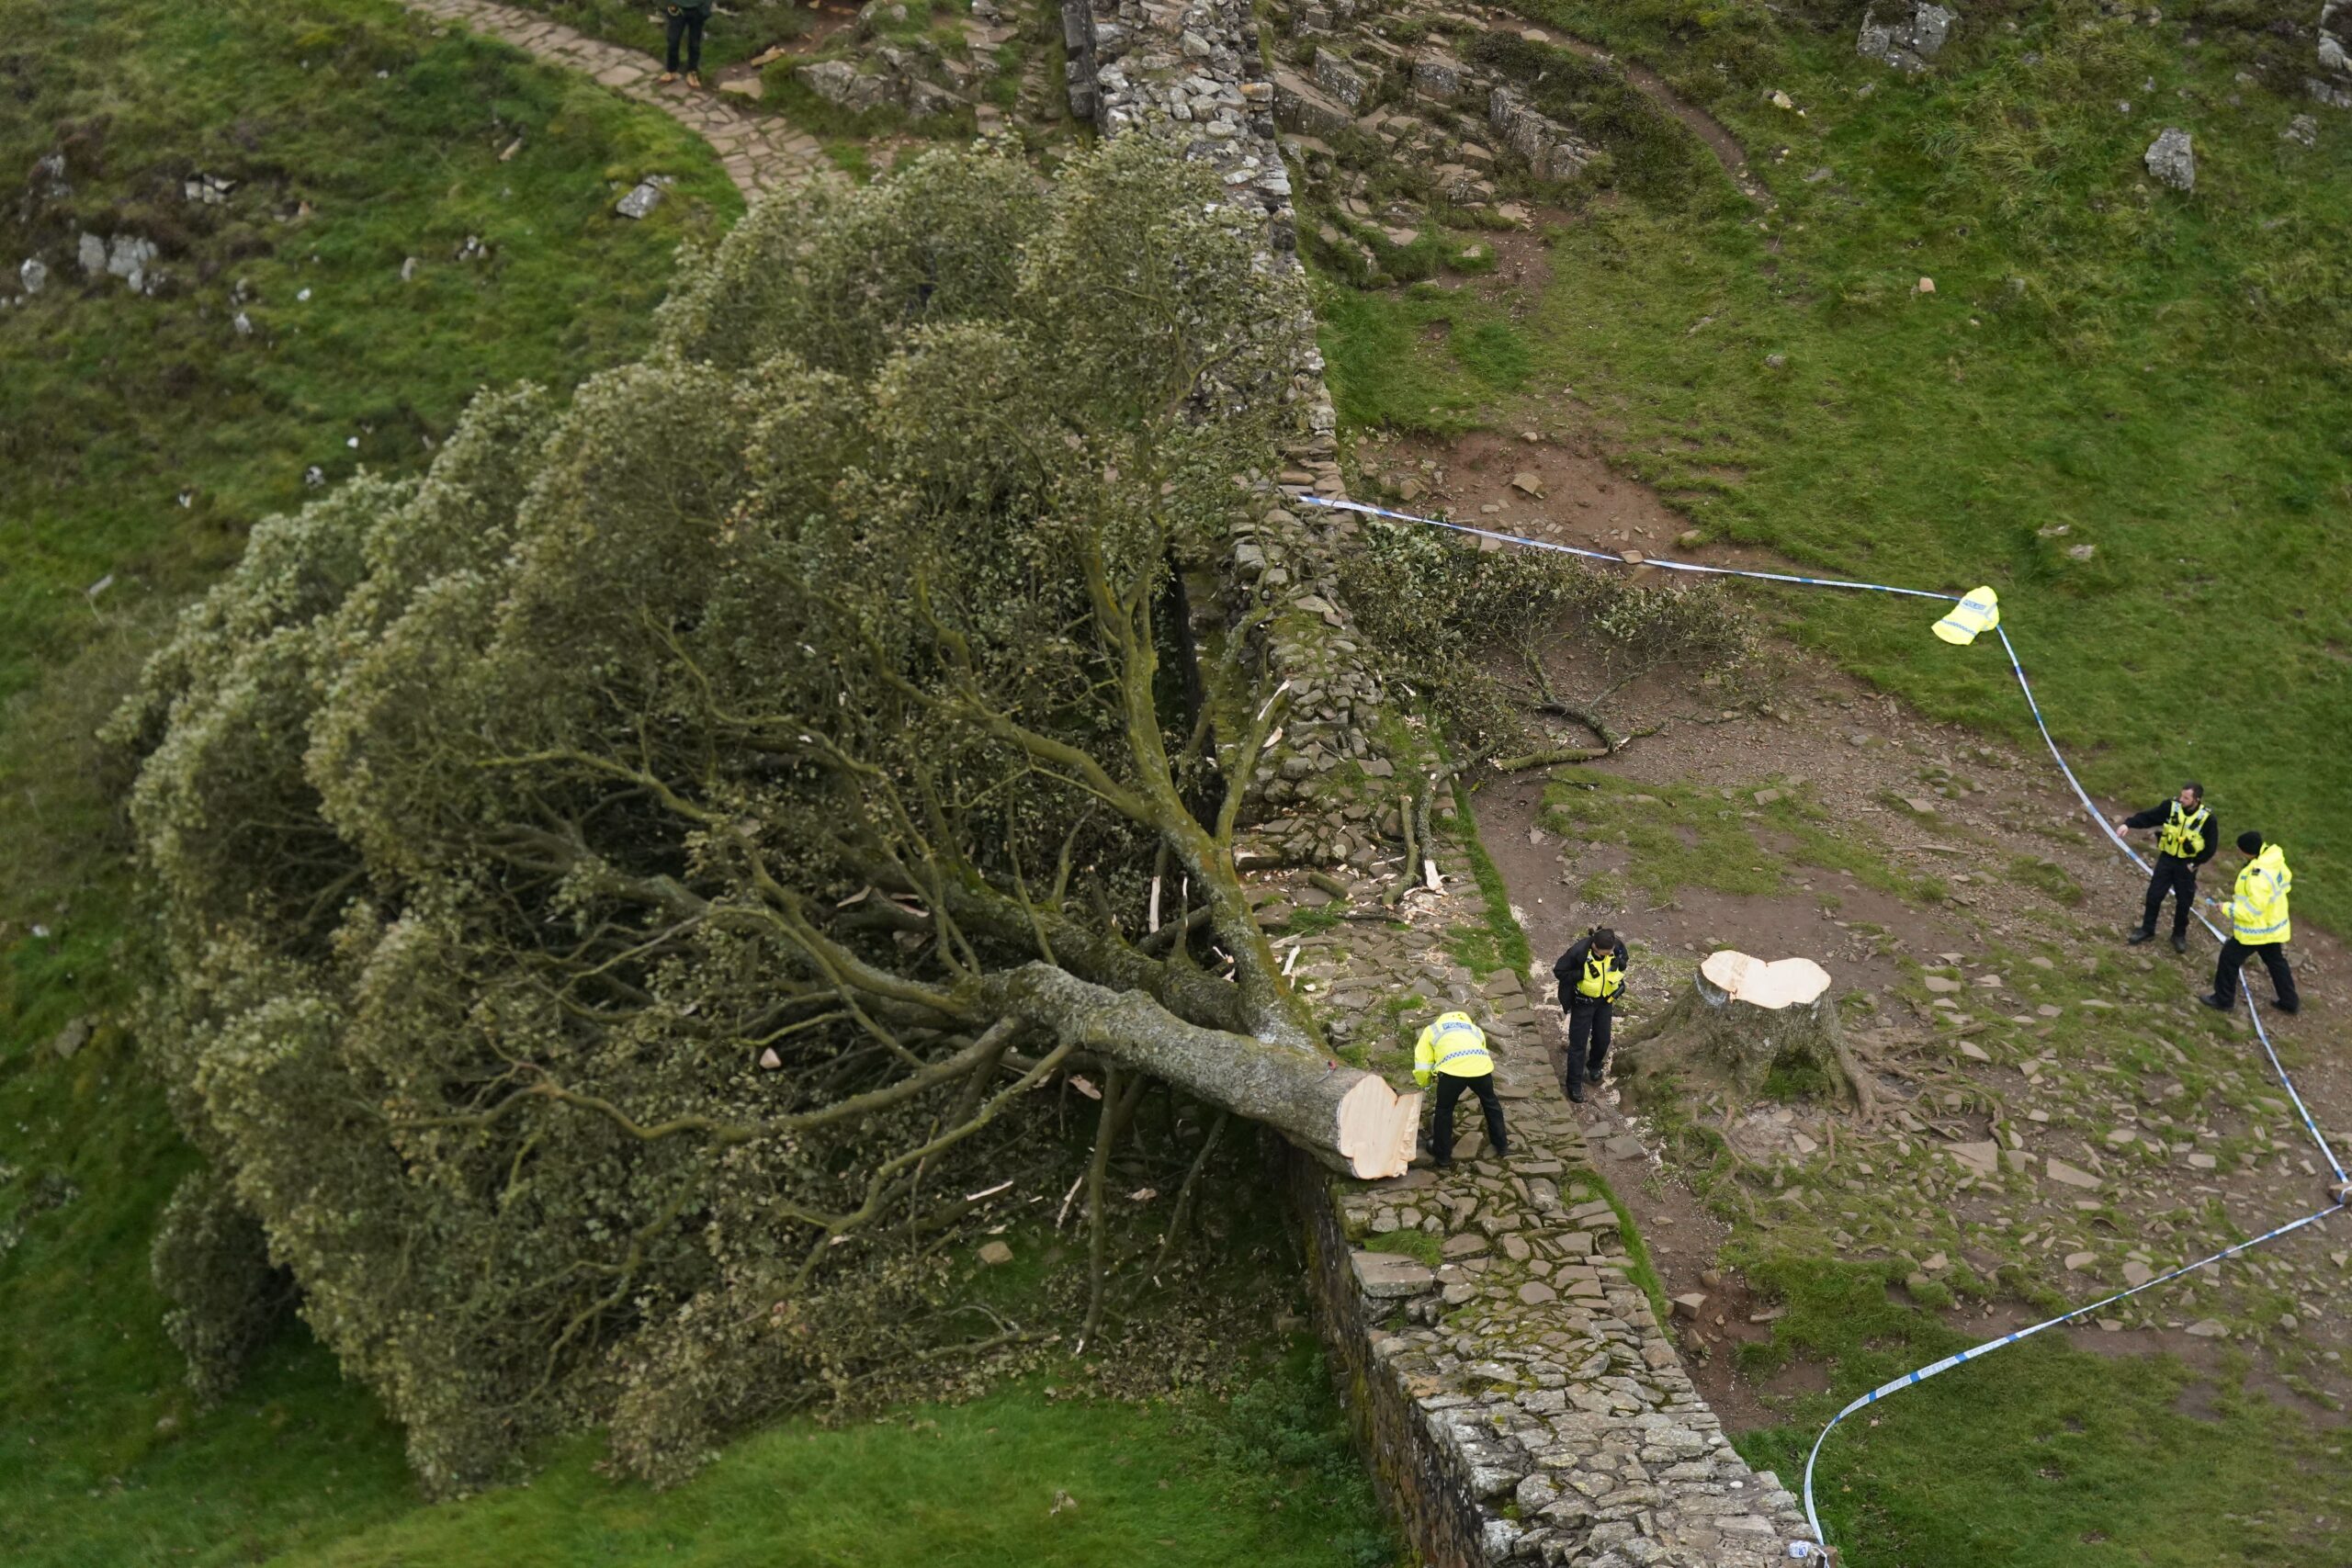 Sycamore Gap tree: Two men due to appear in court over criminal felling – latest